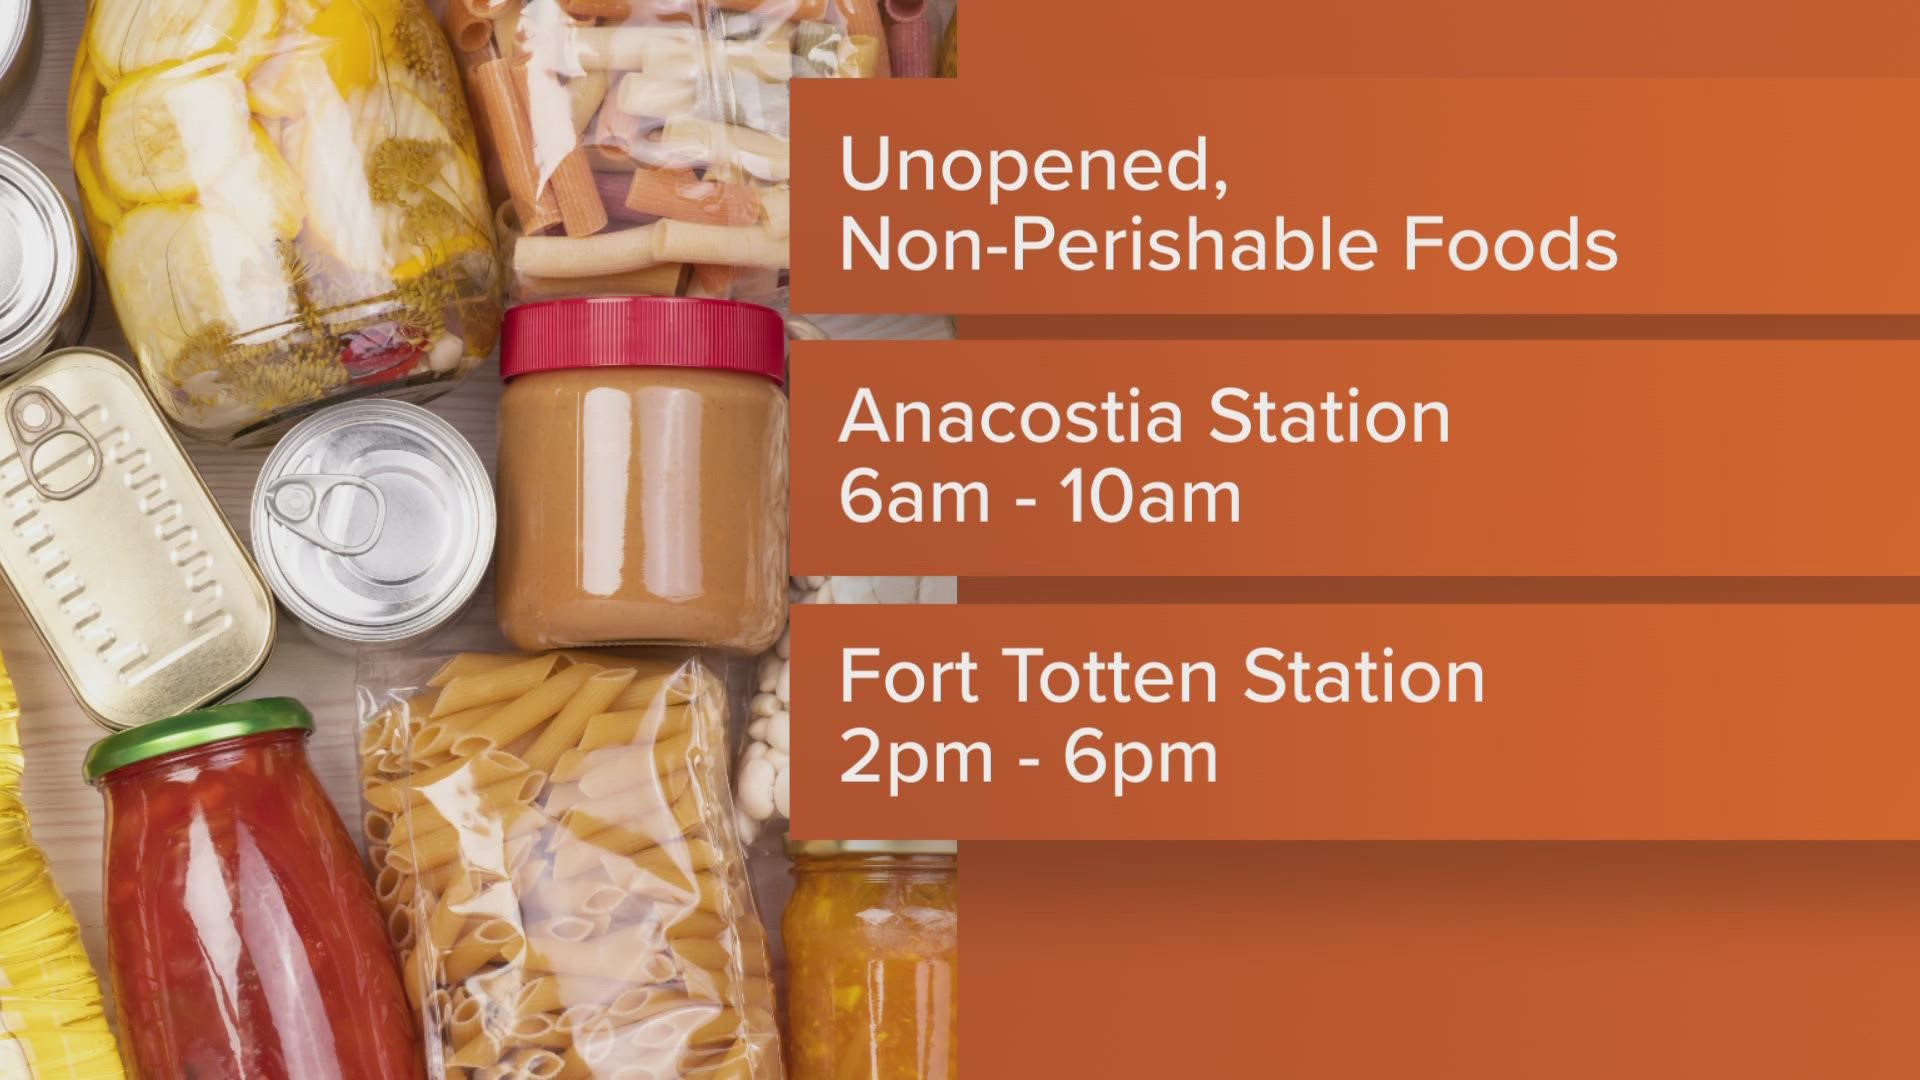 Metro is accepting donations of unopened, non-perishable food to support the Capital Area Food Bank.